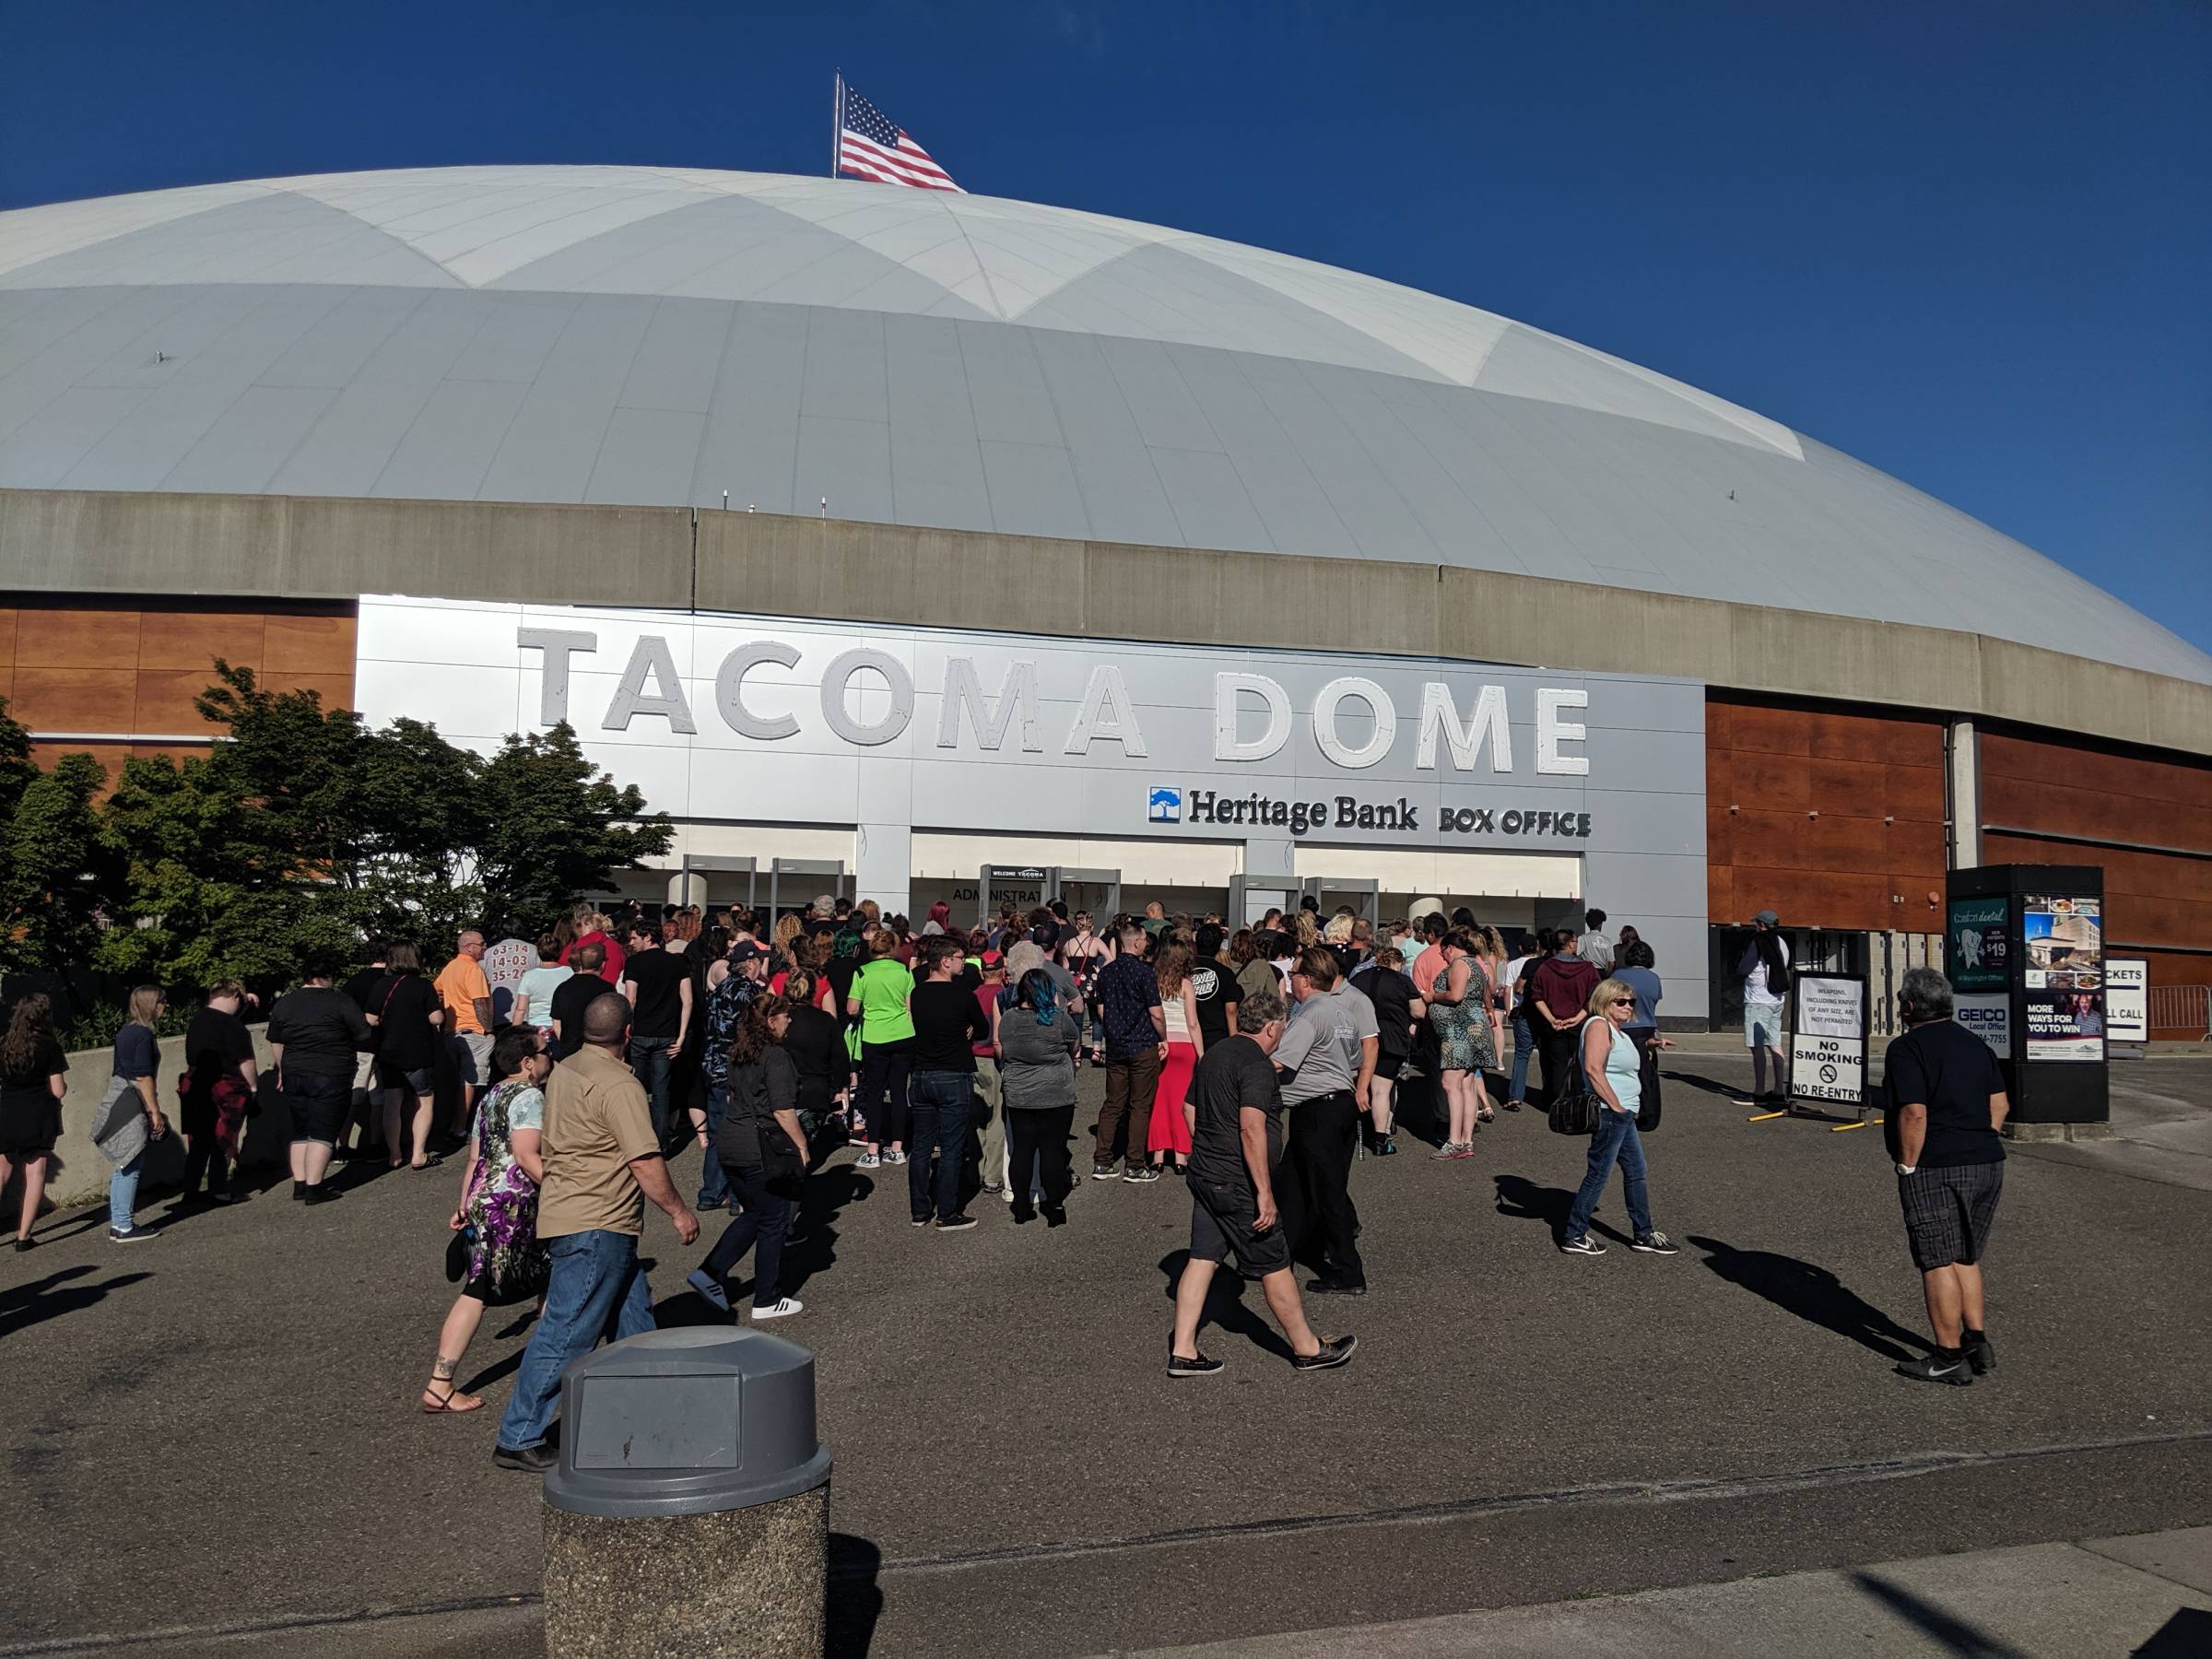 tacoma dome concerts december 2017